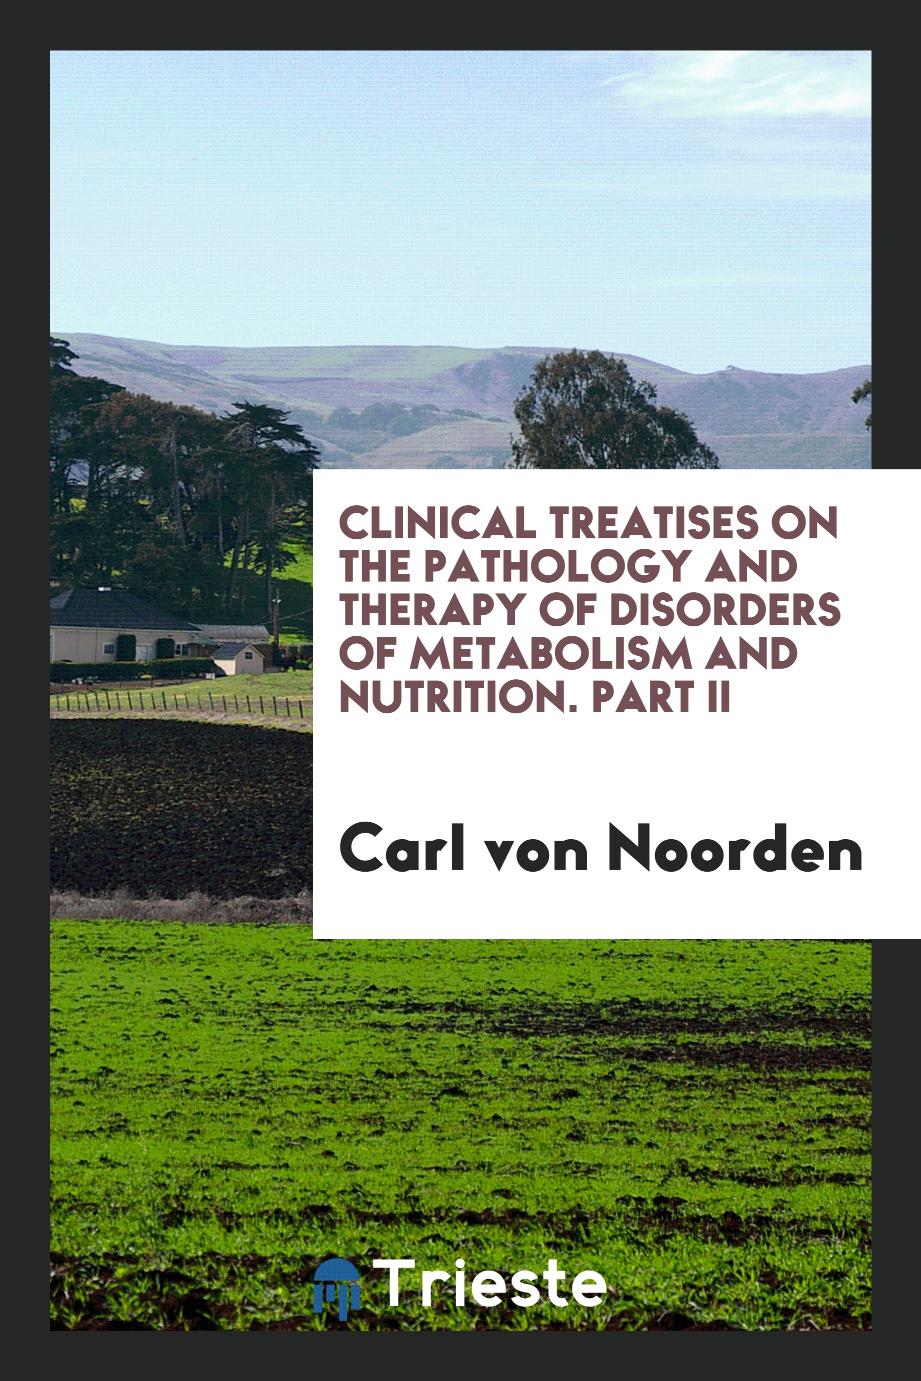 Clinical Treatises on the Pathology and Therapy of Disorders of Metabolism and Nutrition. Part II